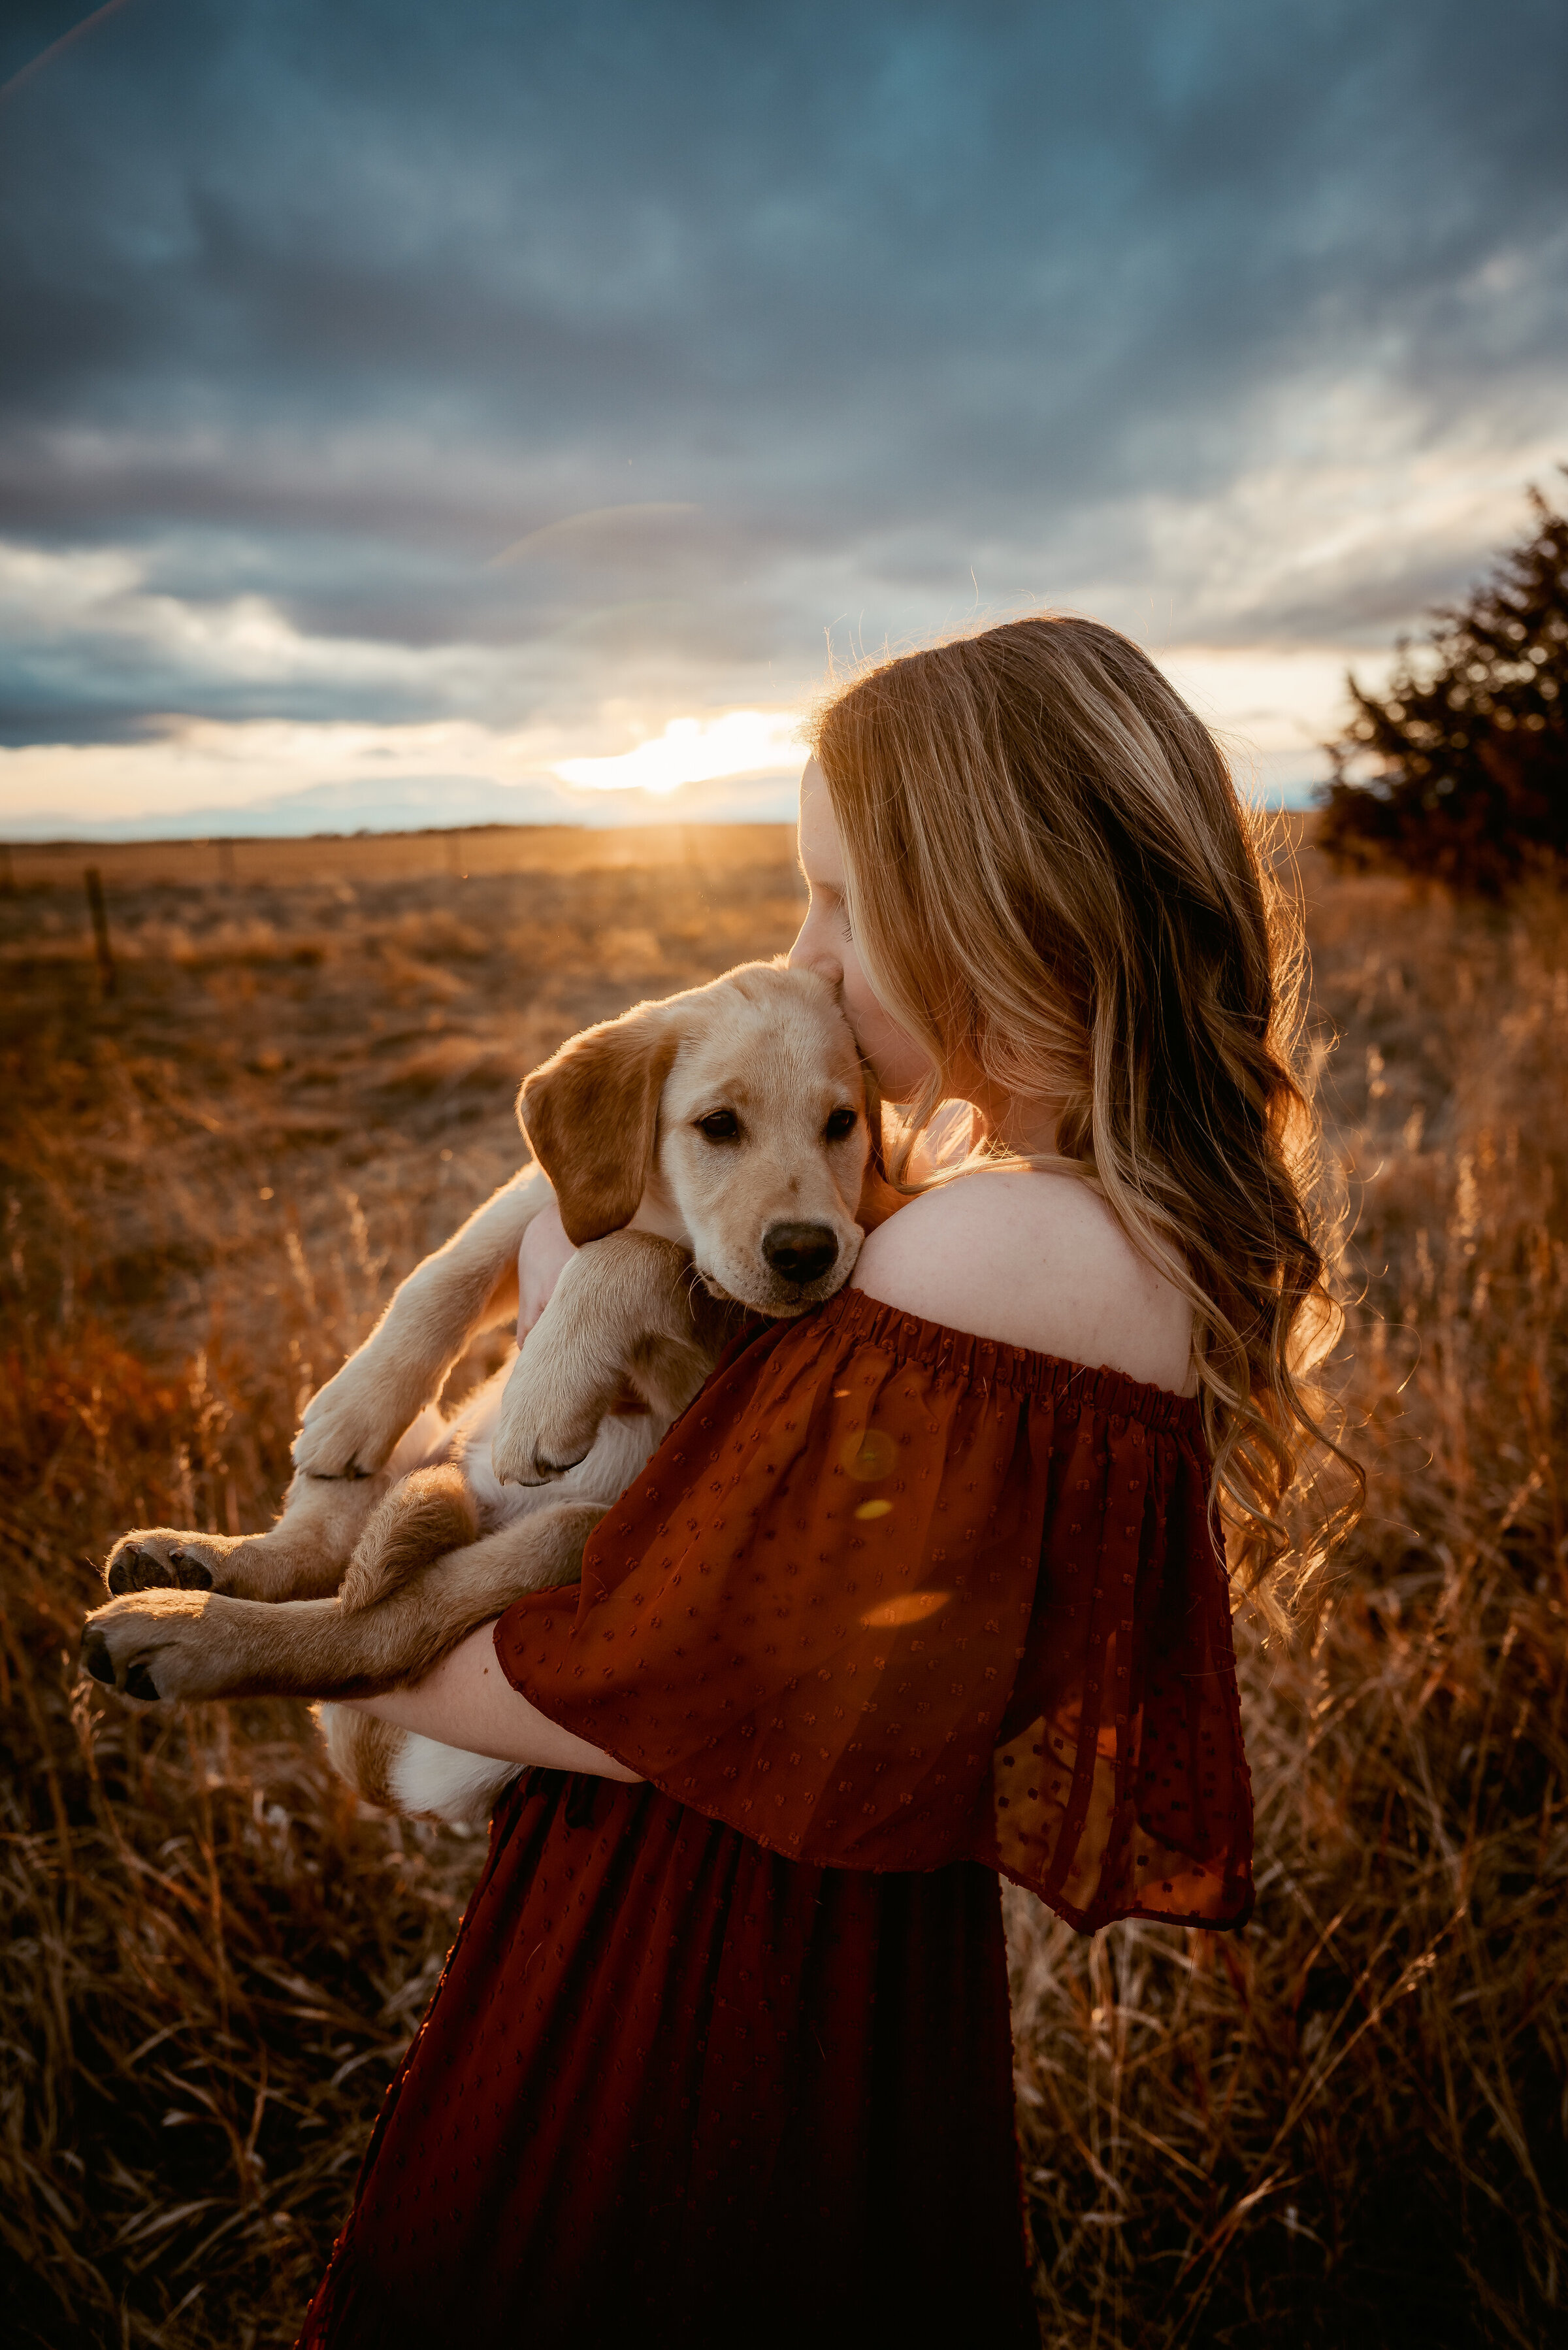 Girl hold young golden lab puppy in arms and kisses it while wearing off the shoulder rust colored dress at sunset